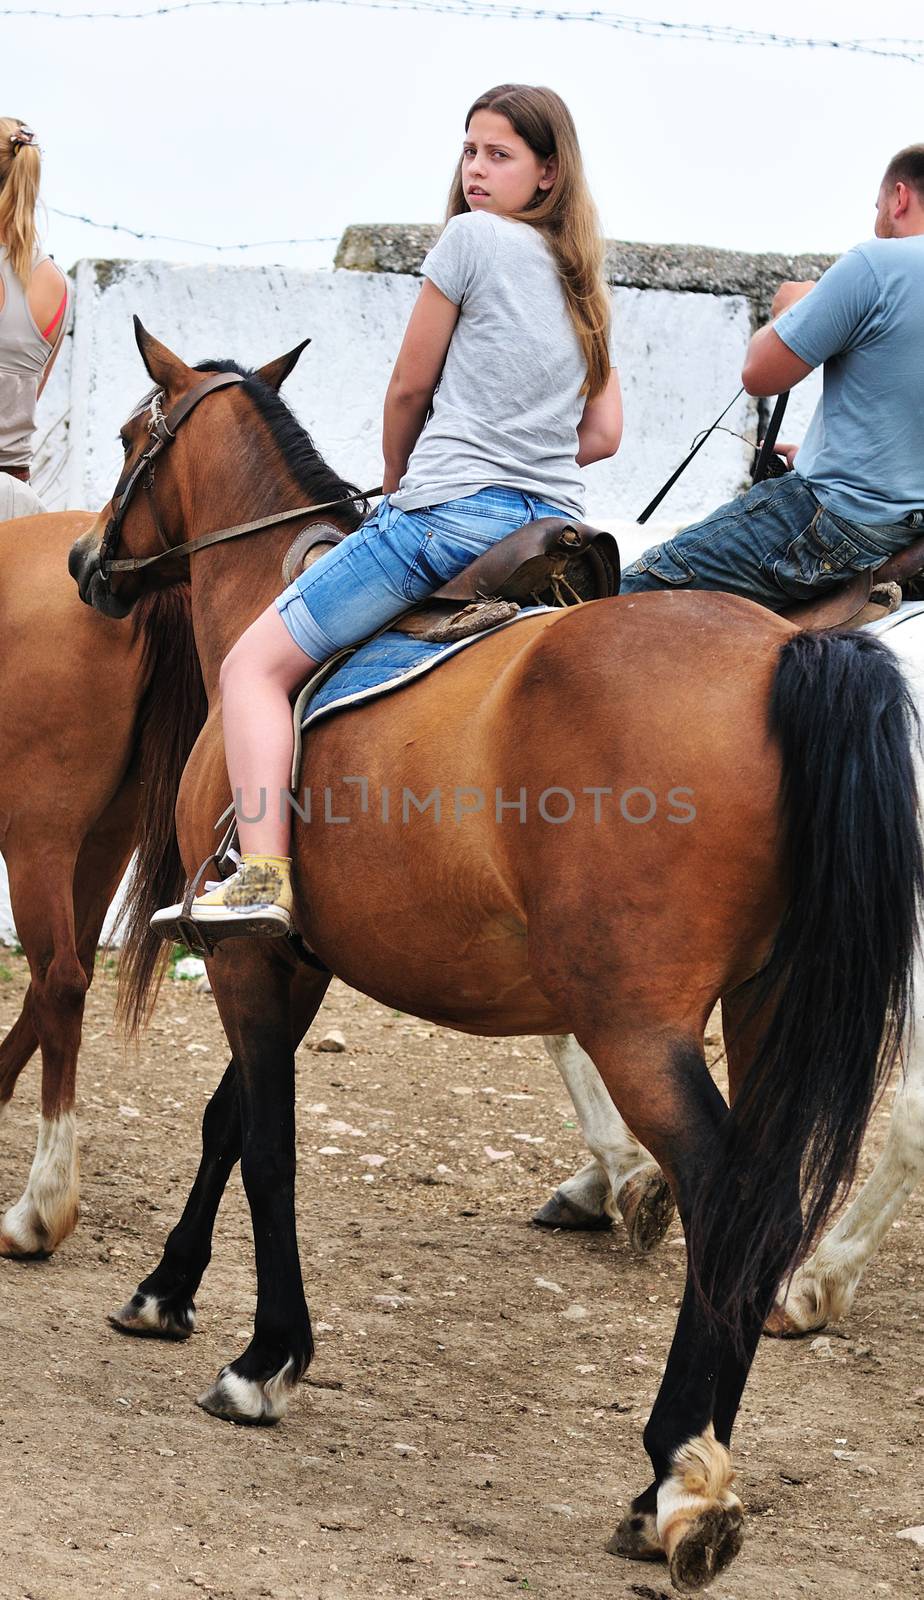 riding the horse by Reana